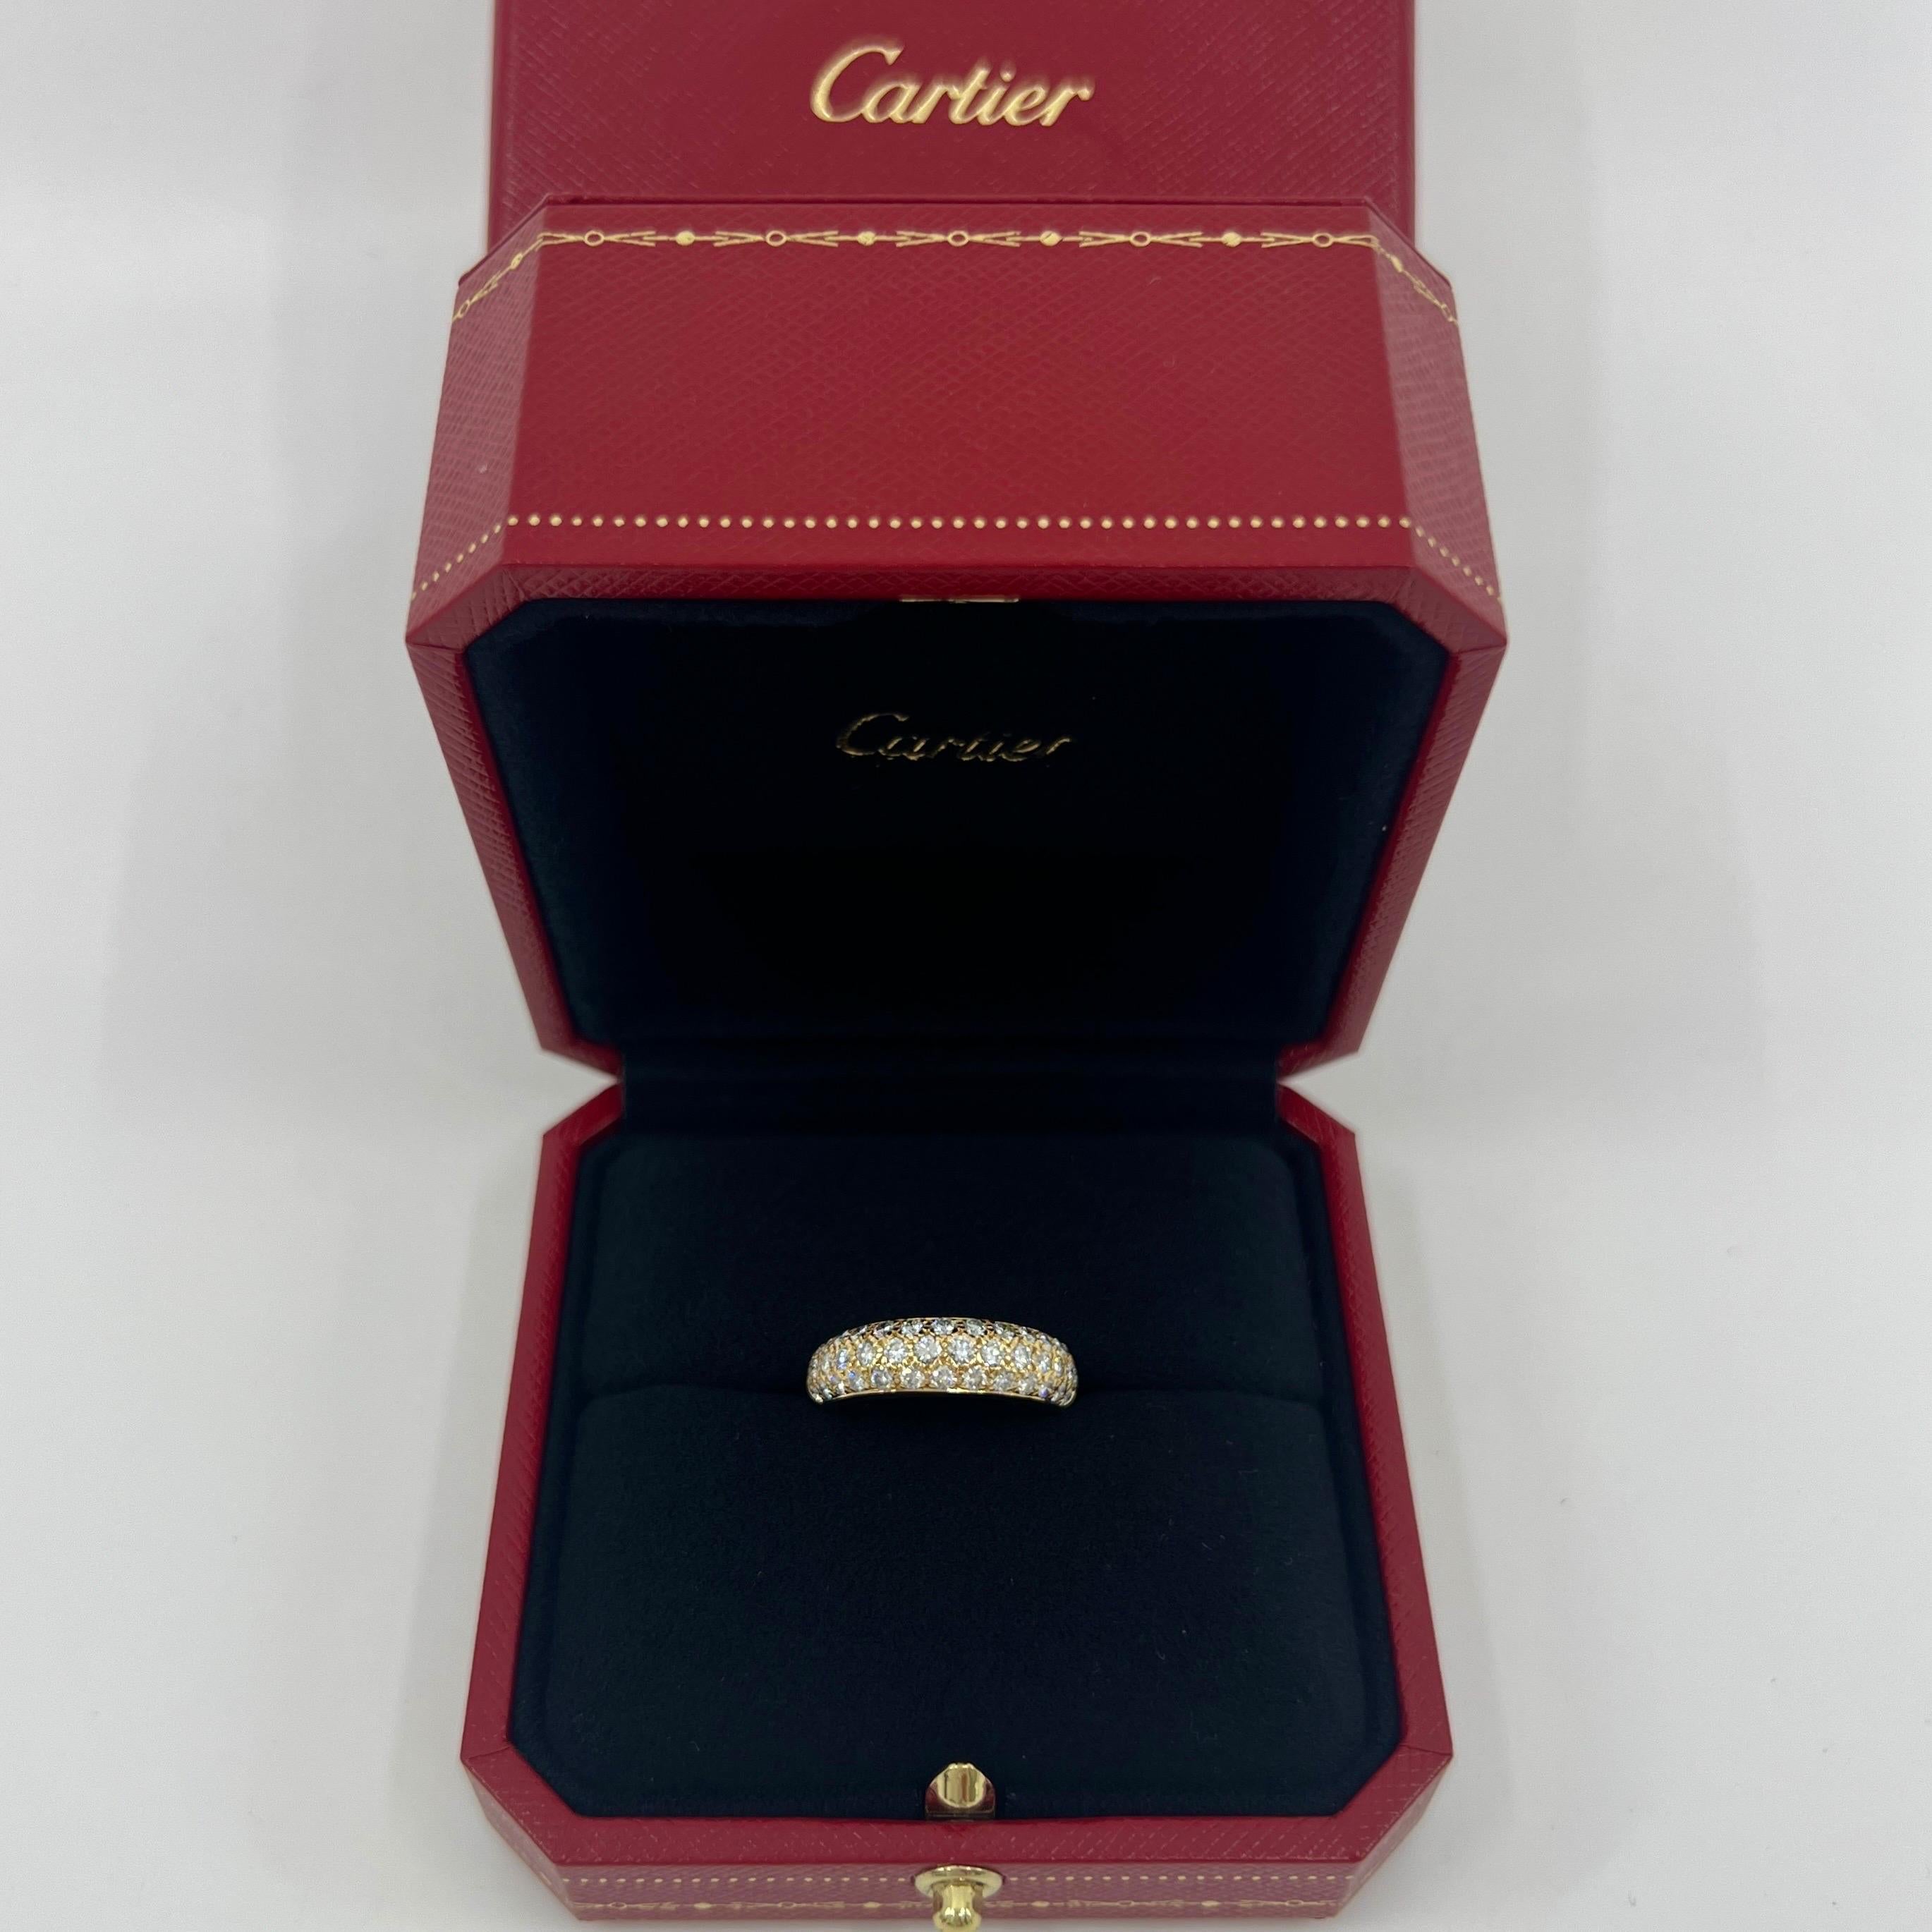 Rare Vintage Cartier Pavé Diamond 18k Yellow Gold Band Ring.

This beautifully made ring by Cartier features a curved dome design with three rows of beautifully set Pavé diamonds going halfway around the band.

The diamonds are of excellent quality.